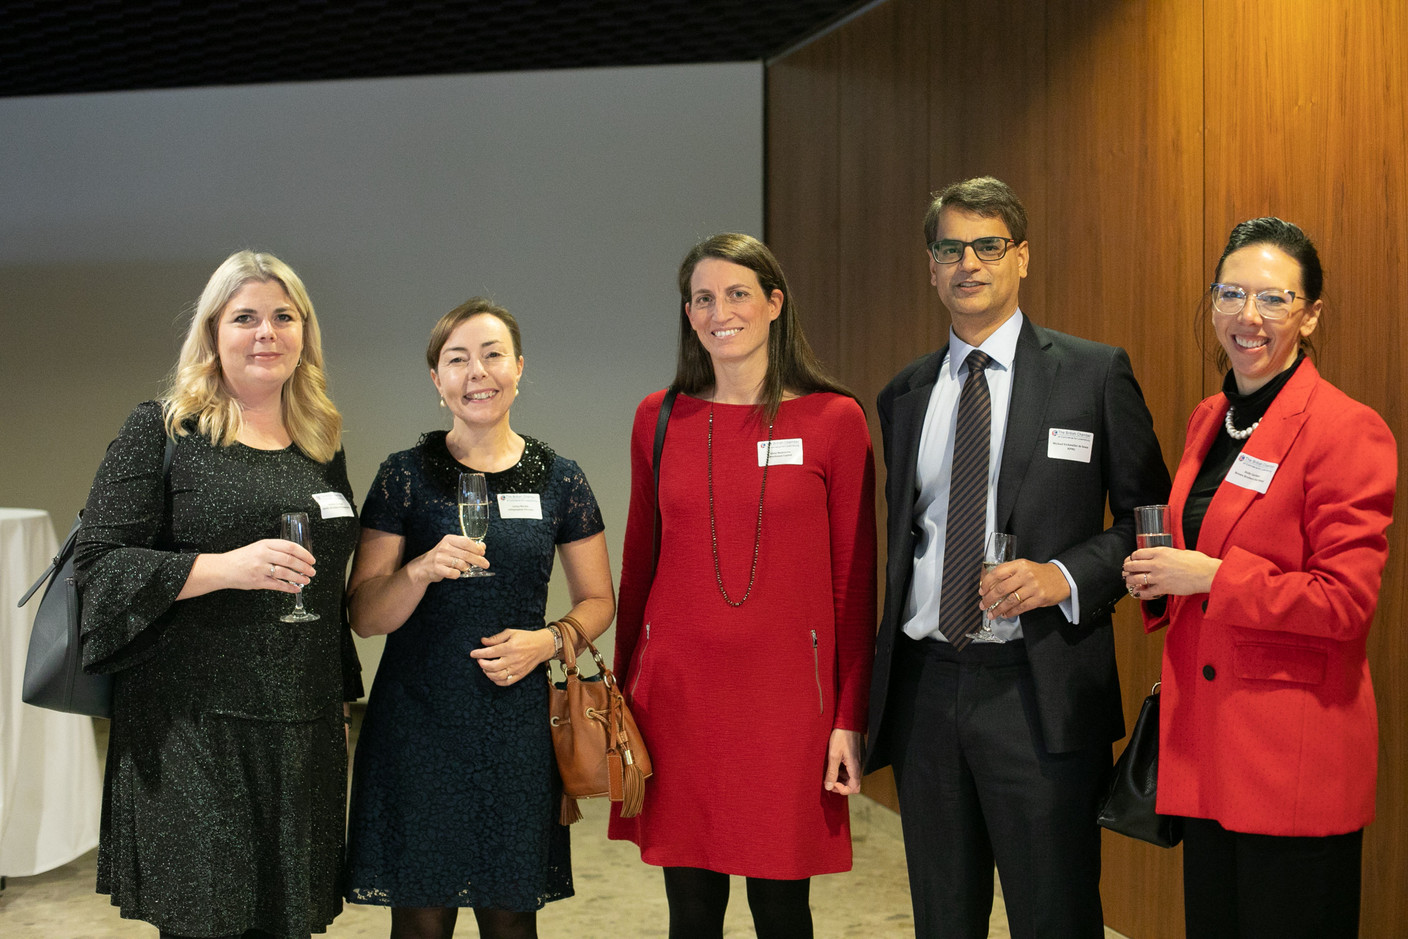 Rowena Giordina, Savills Investment Management (on left), Lorna Mackie, independent director (second from left), Michael Eichmüller, KPMG (second from right), Holly Gardner, Brown Brothers Harriman (on right). Photo: Matic Zorman / Maison Moderne